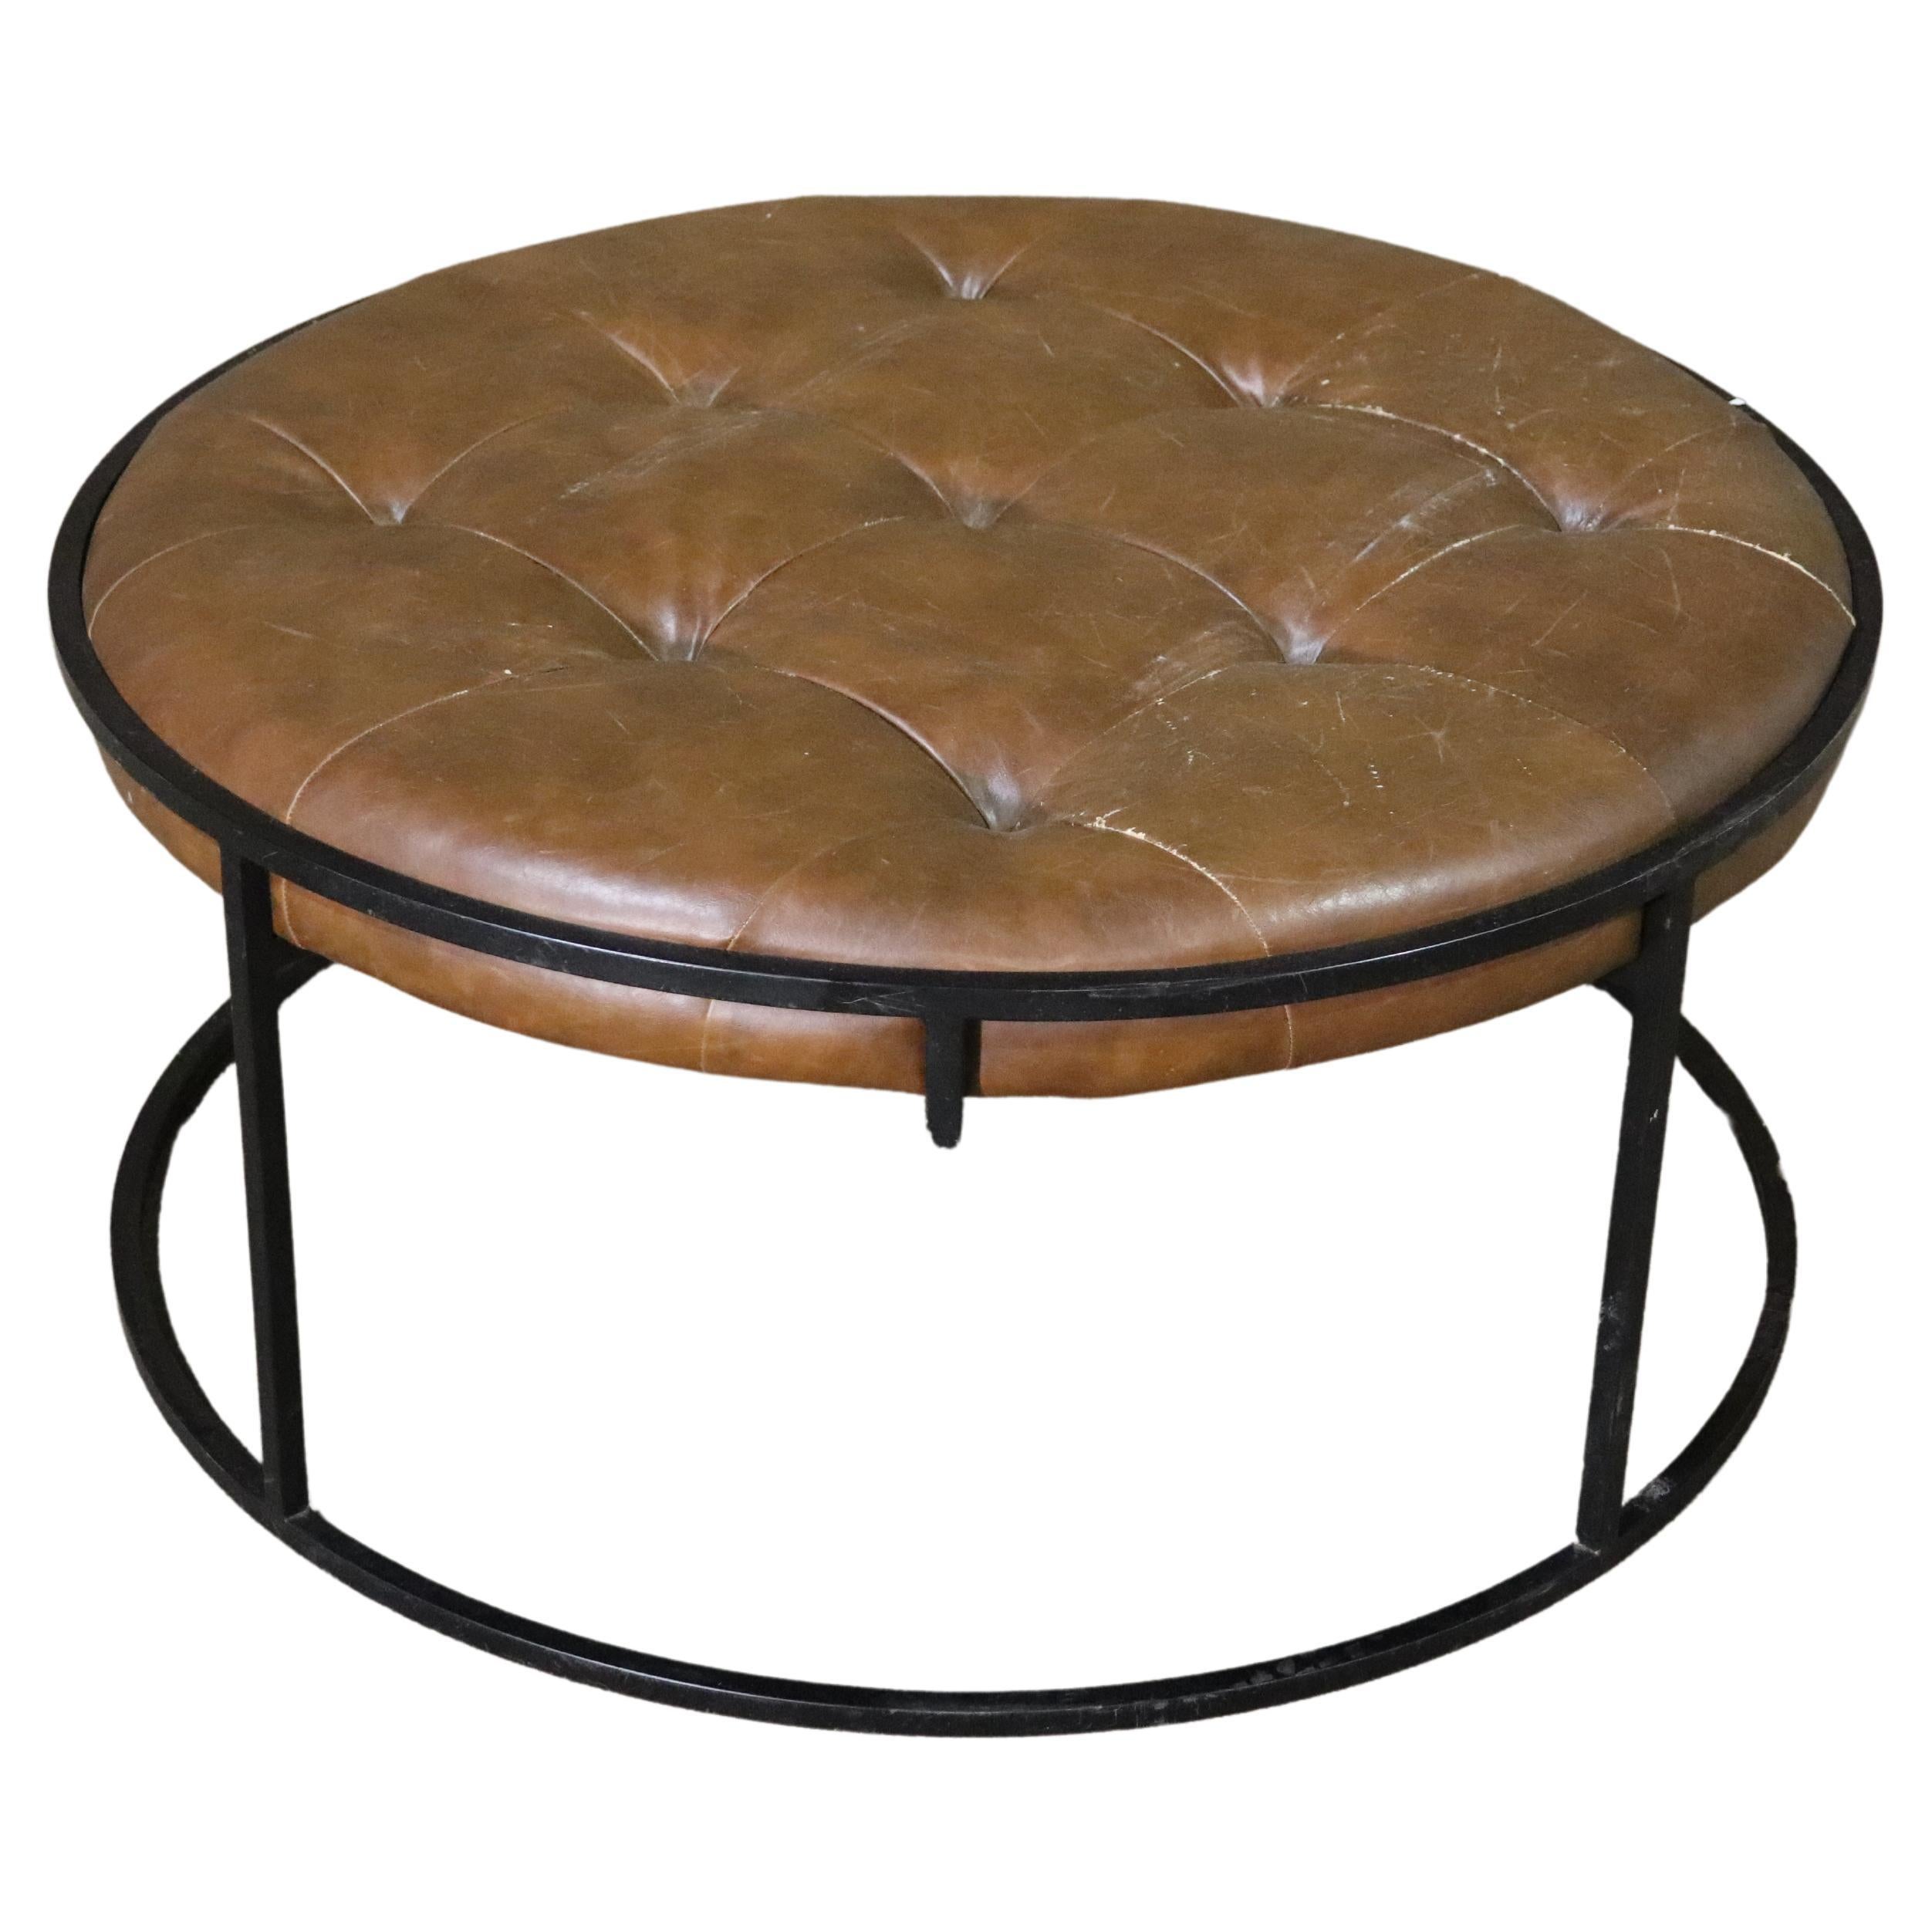 Large Leather Tufted Ottoman